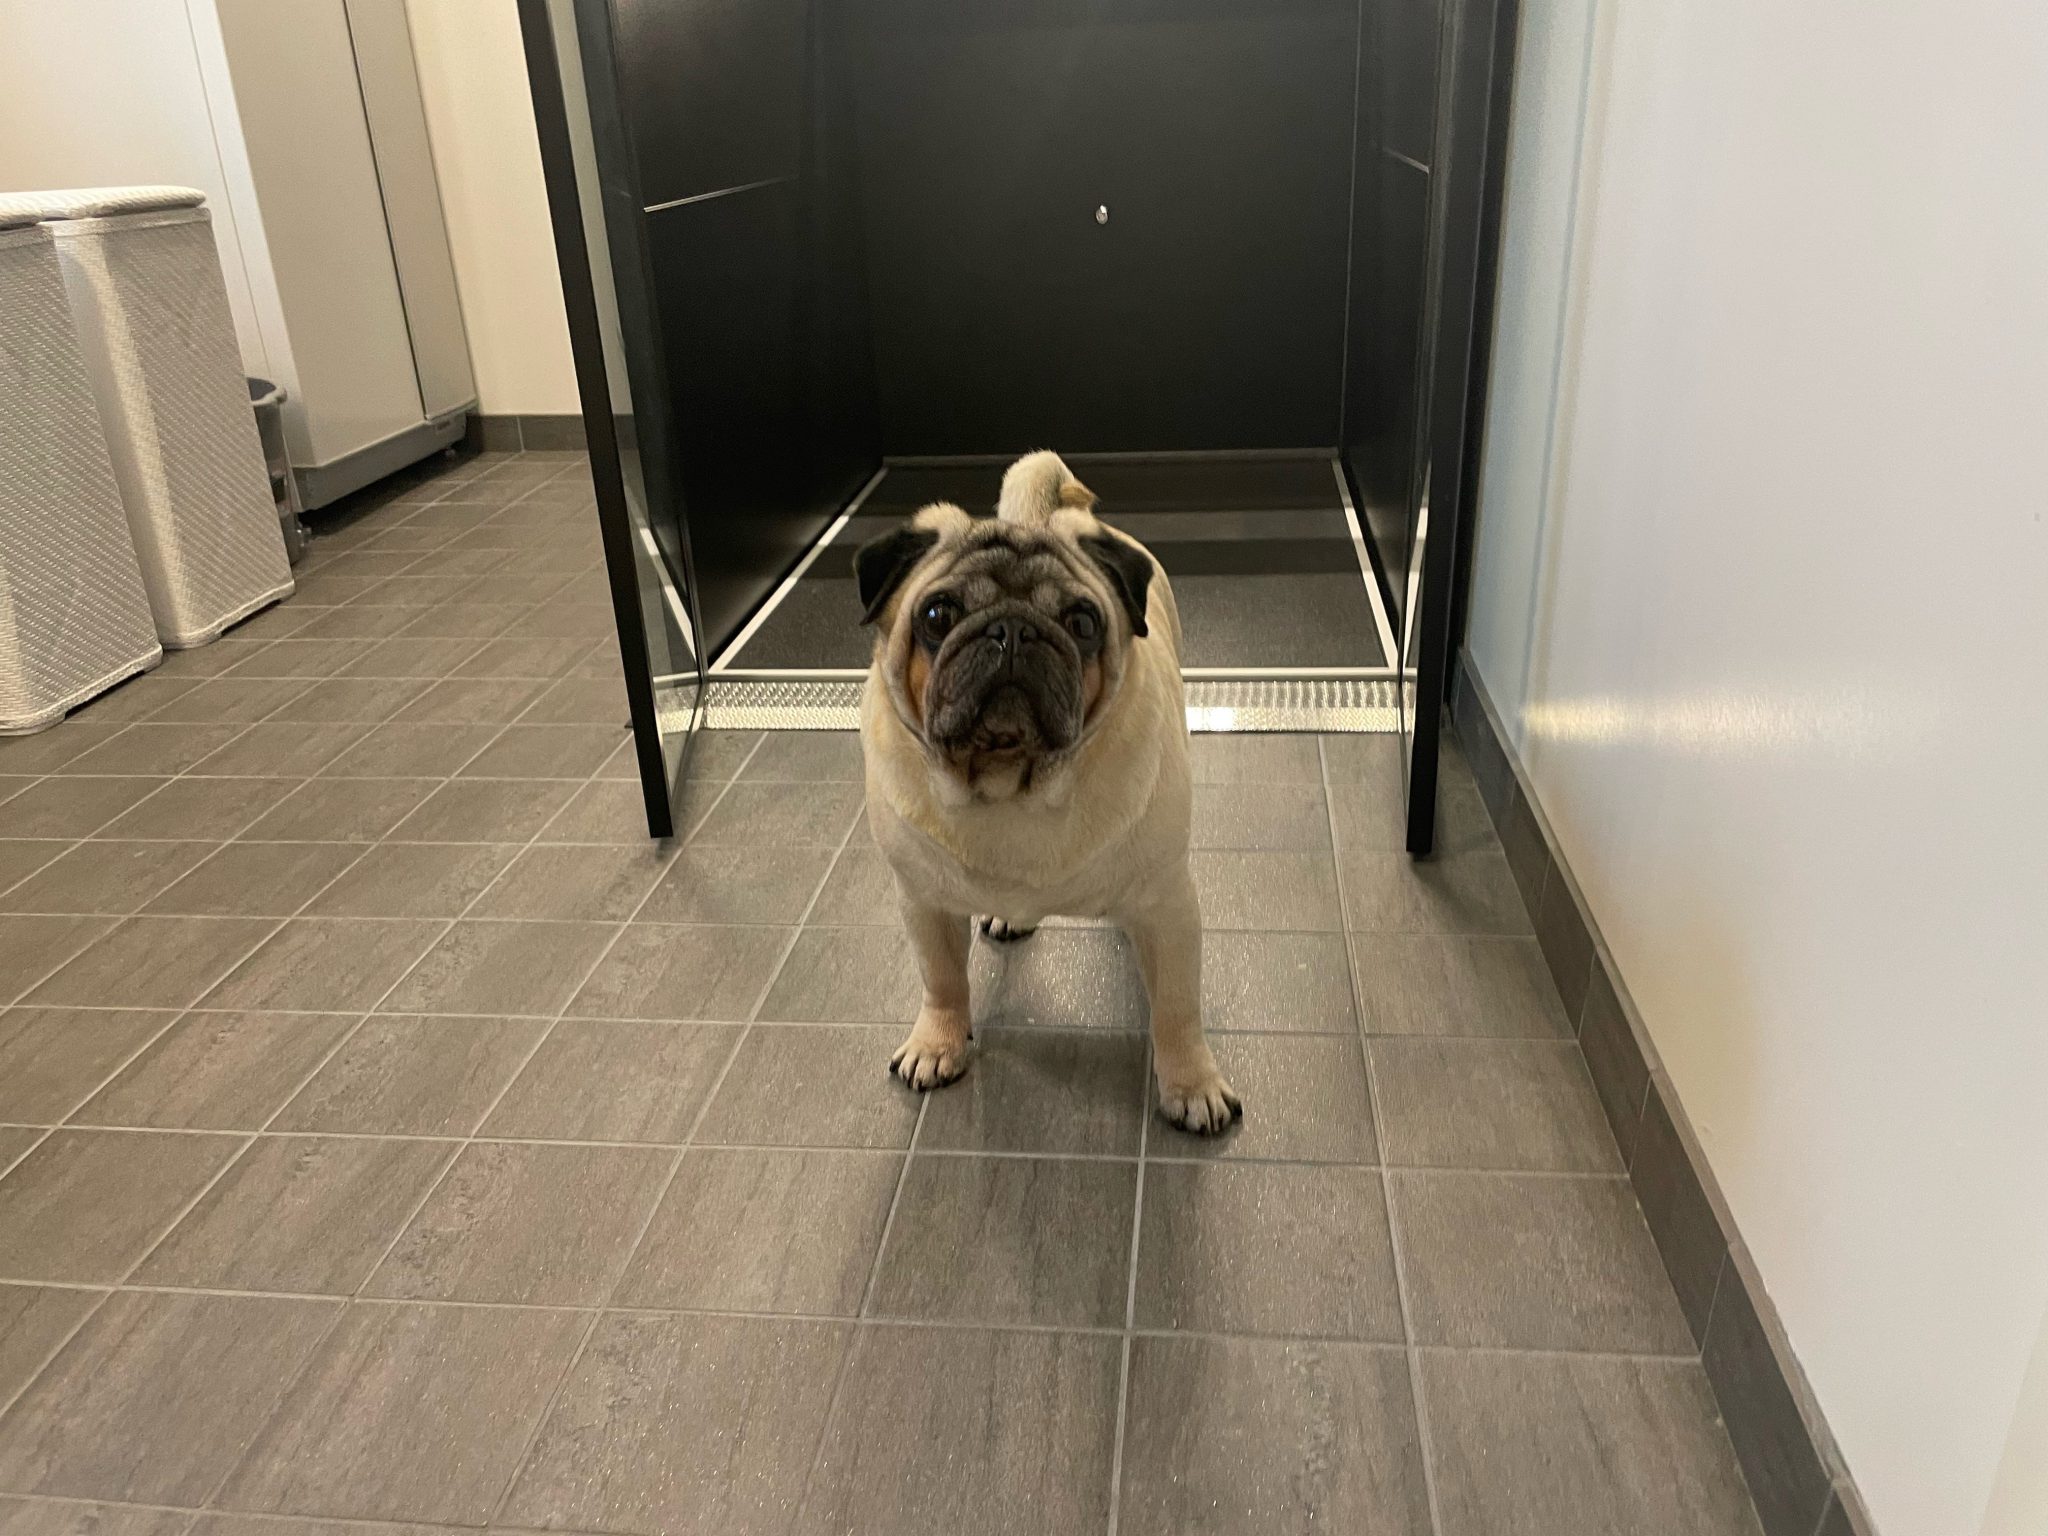 Buster, the pug, in front of an Aritco HomeLift